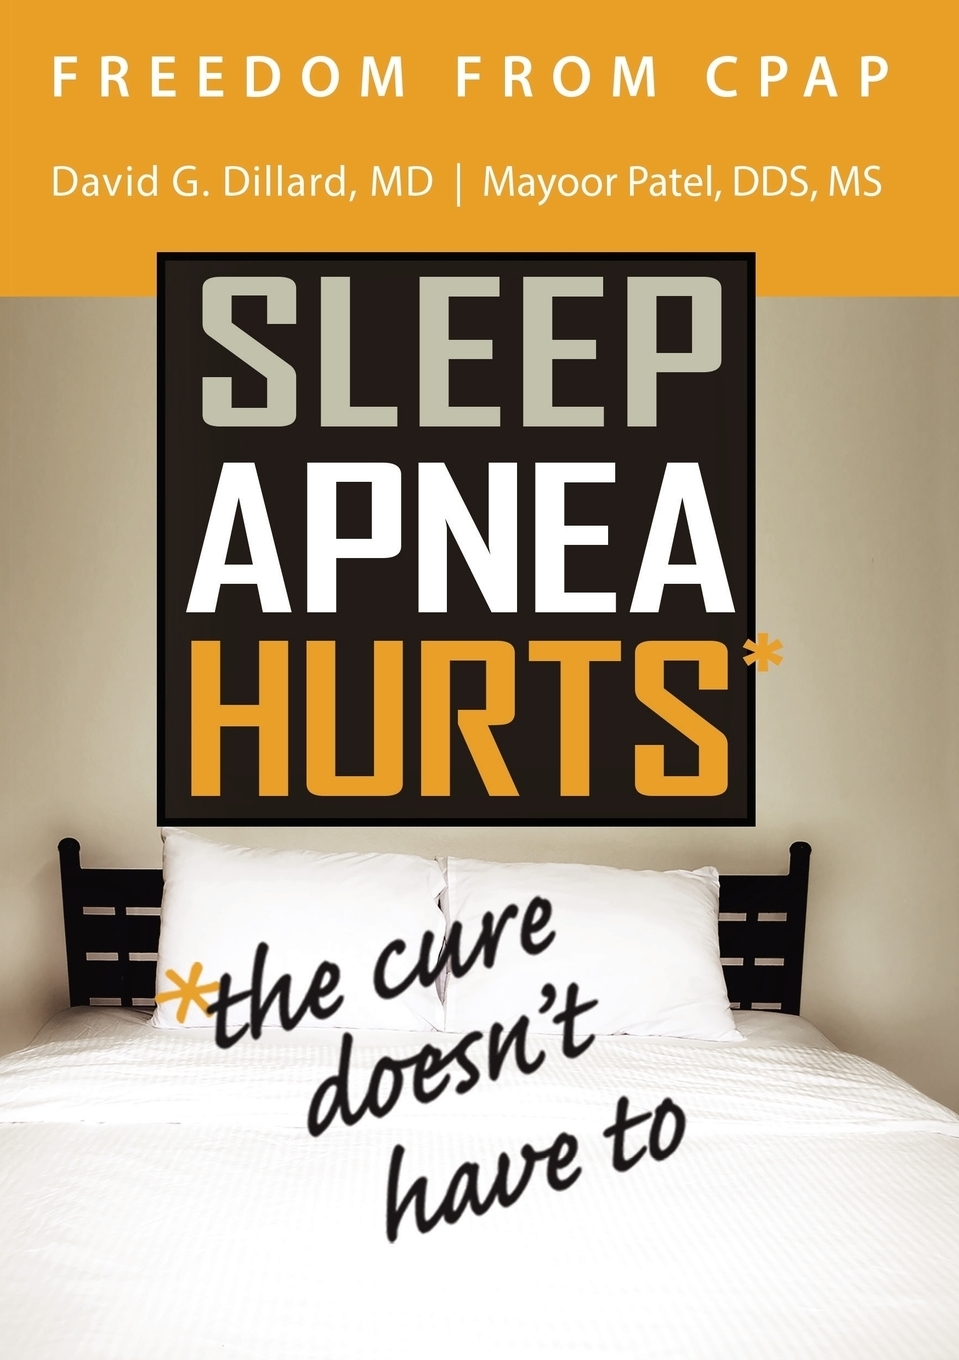 Freedom from CPAP. Sleep Apnea Hurts, the Cure Doesn`t Have To